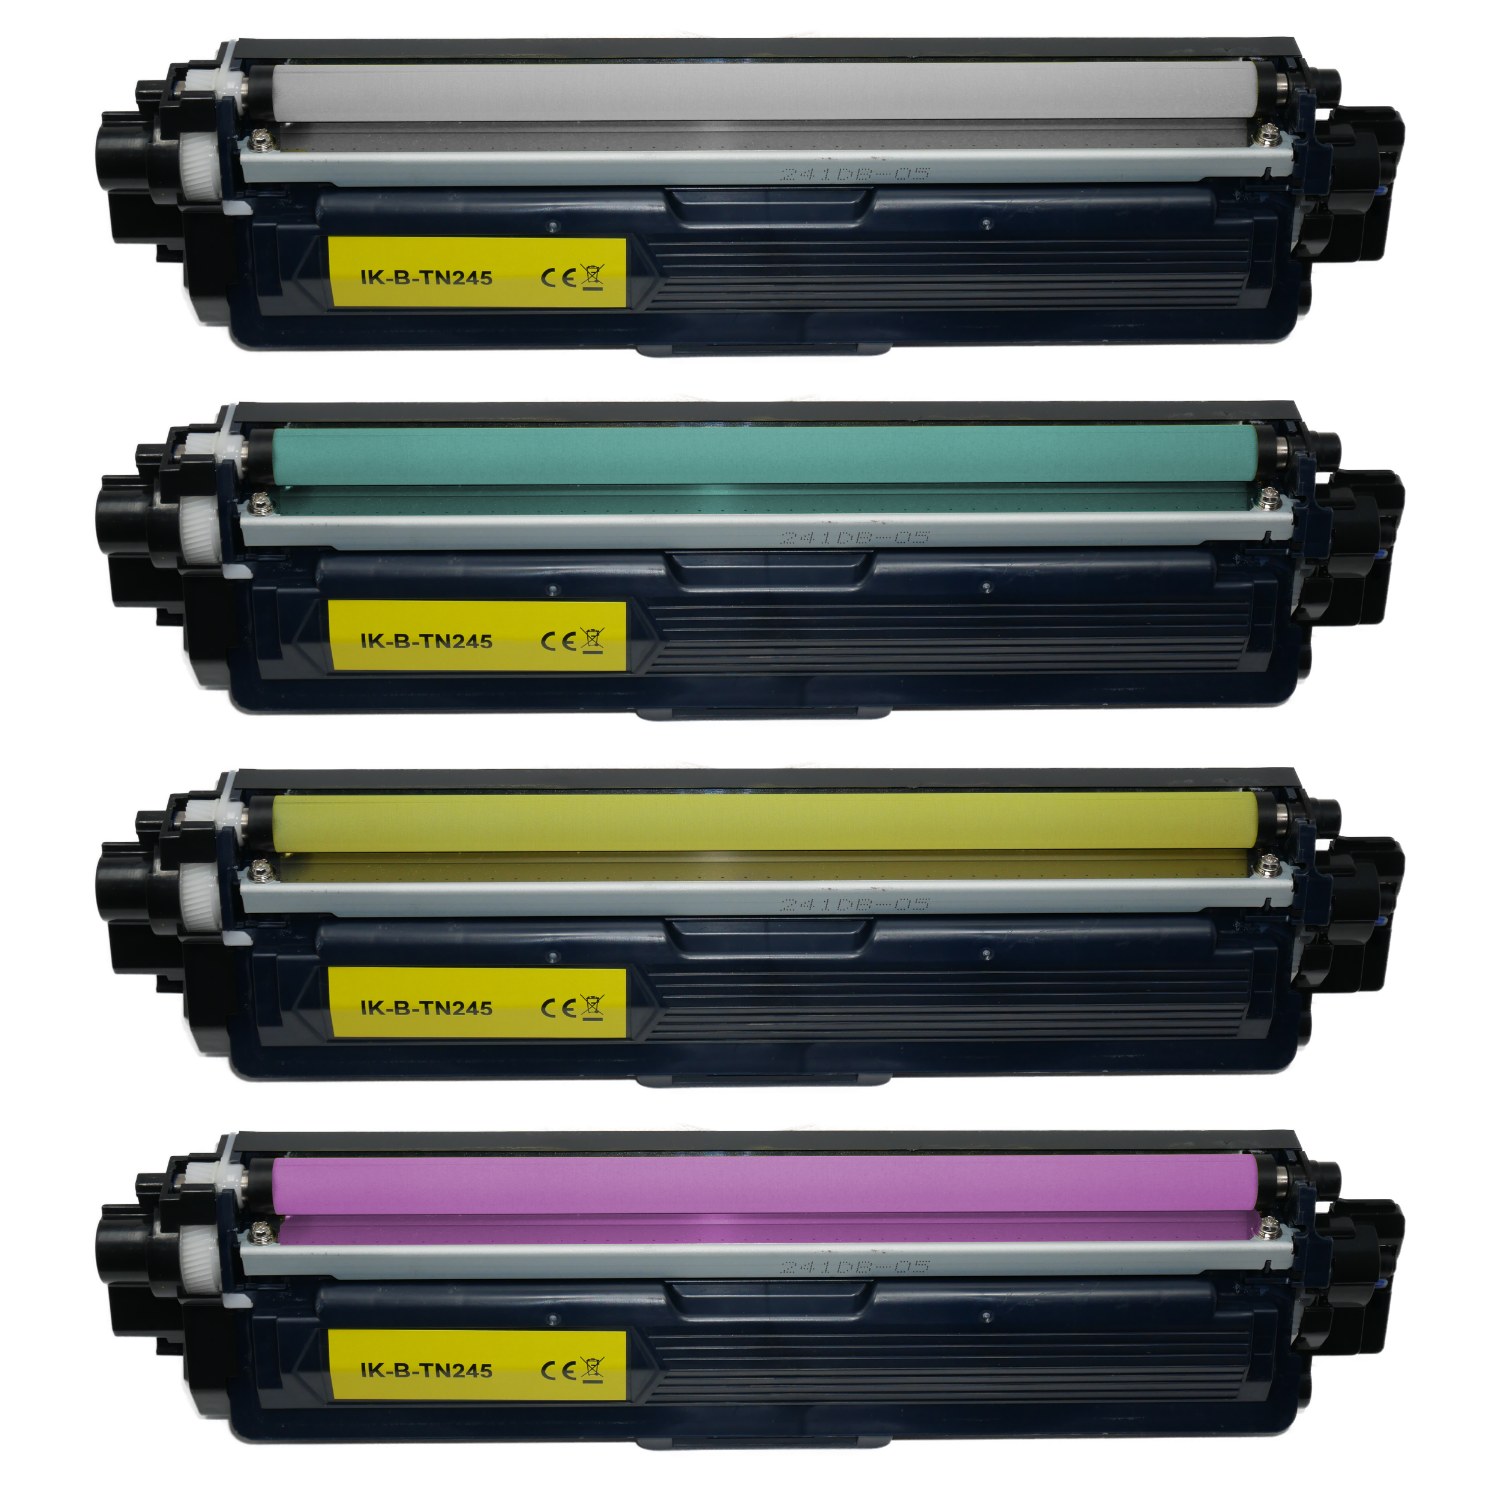 Brother DCP-9020CDW Toner Cartridges